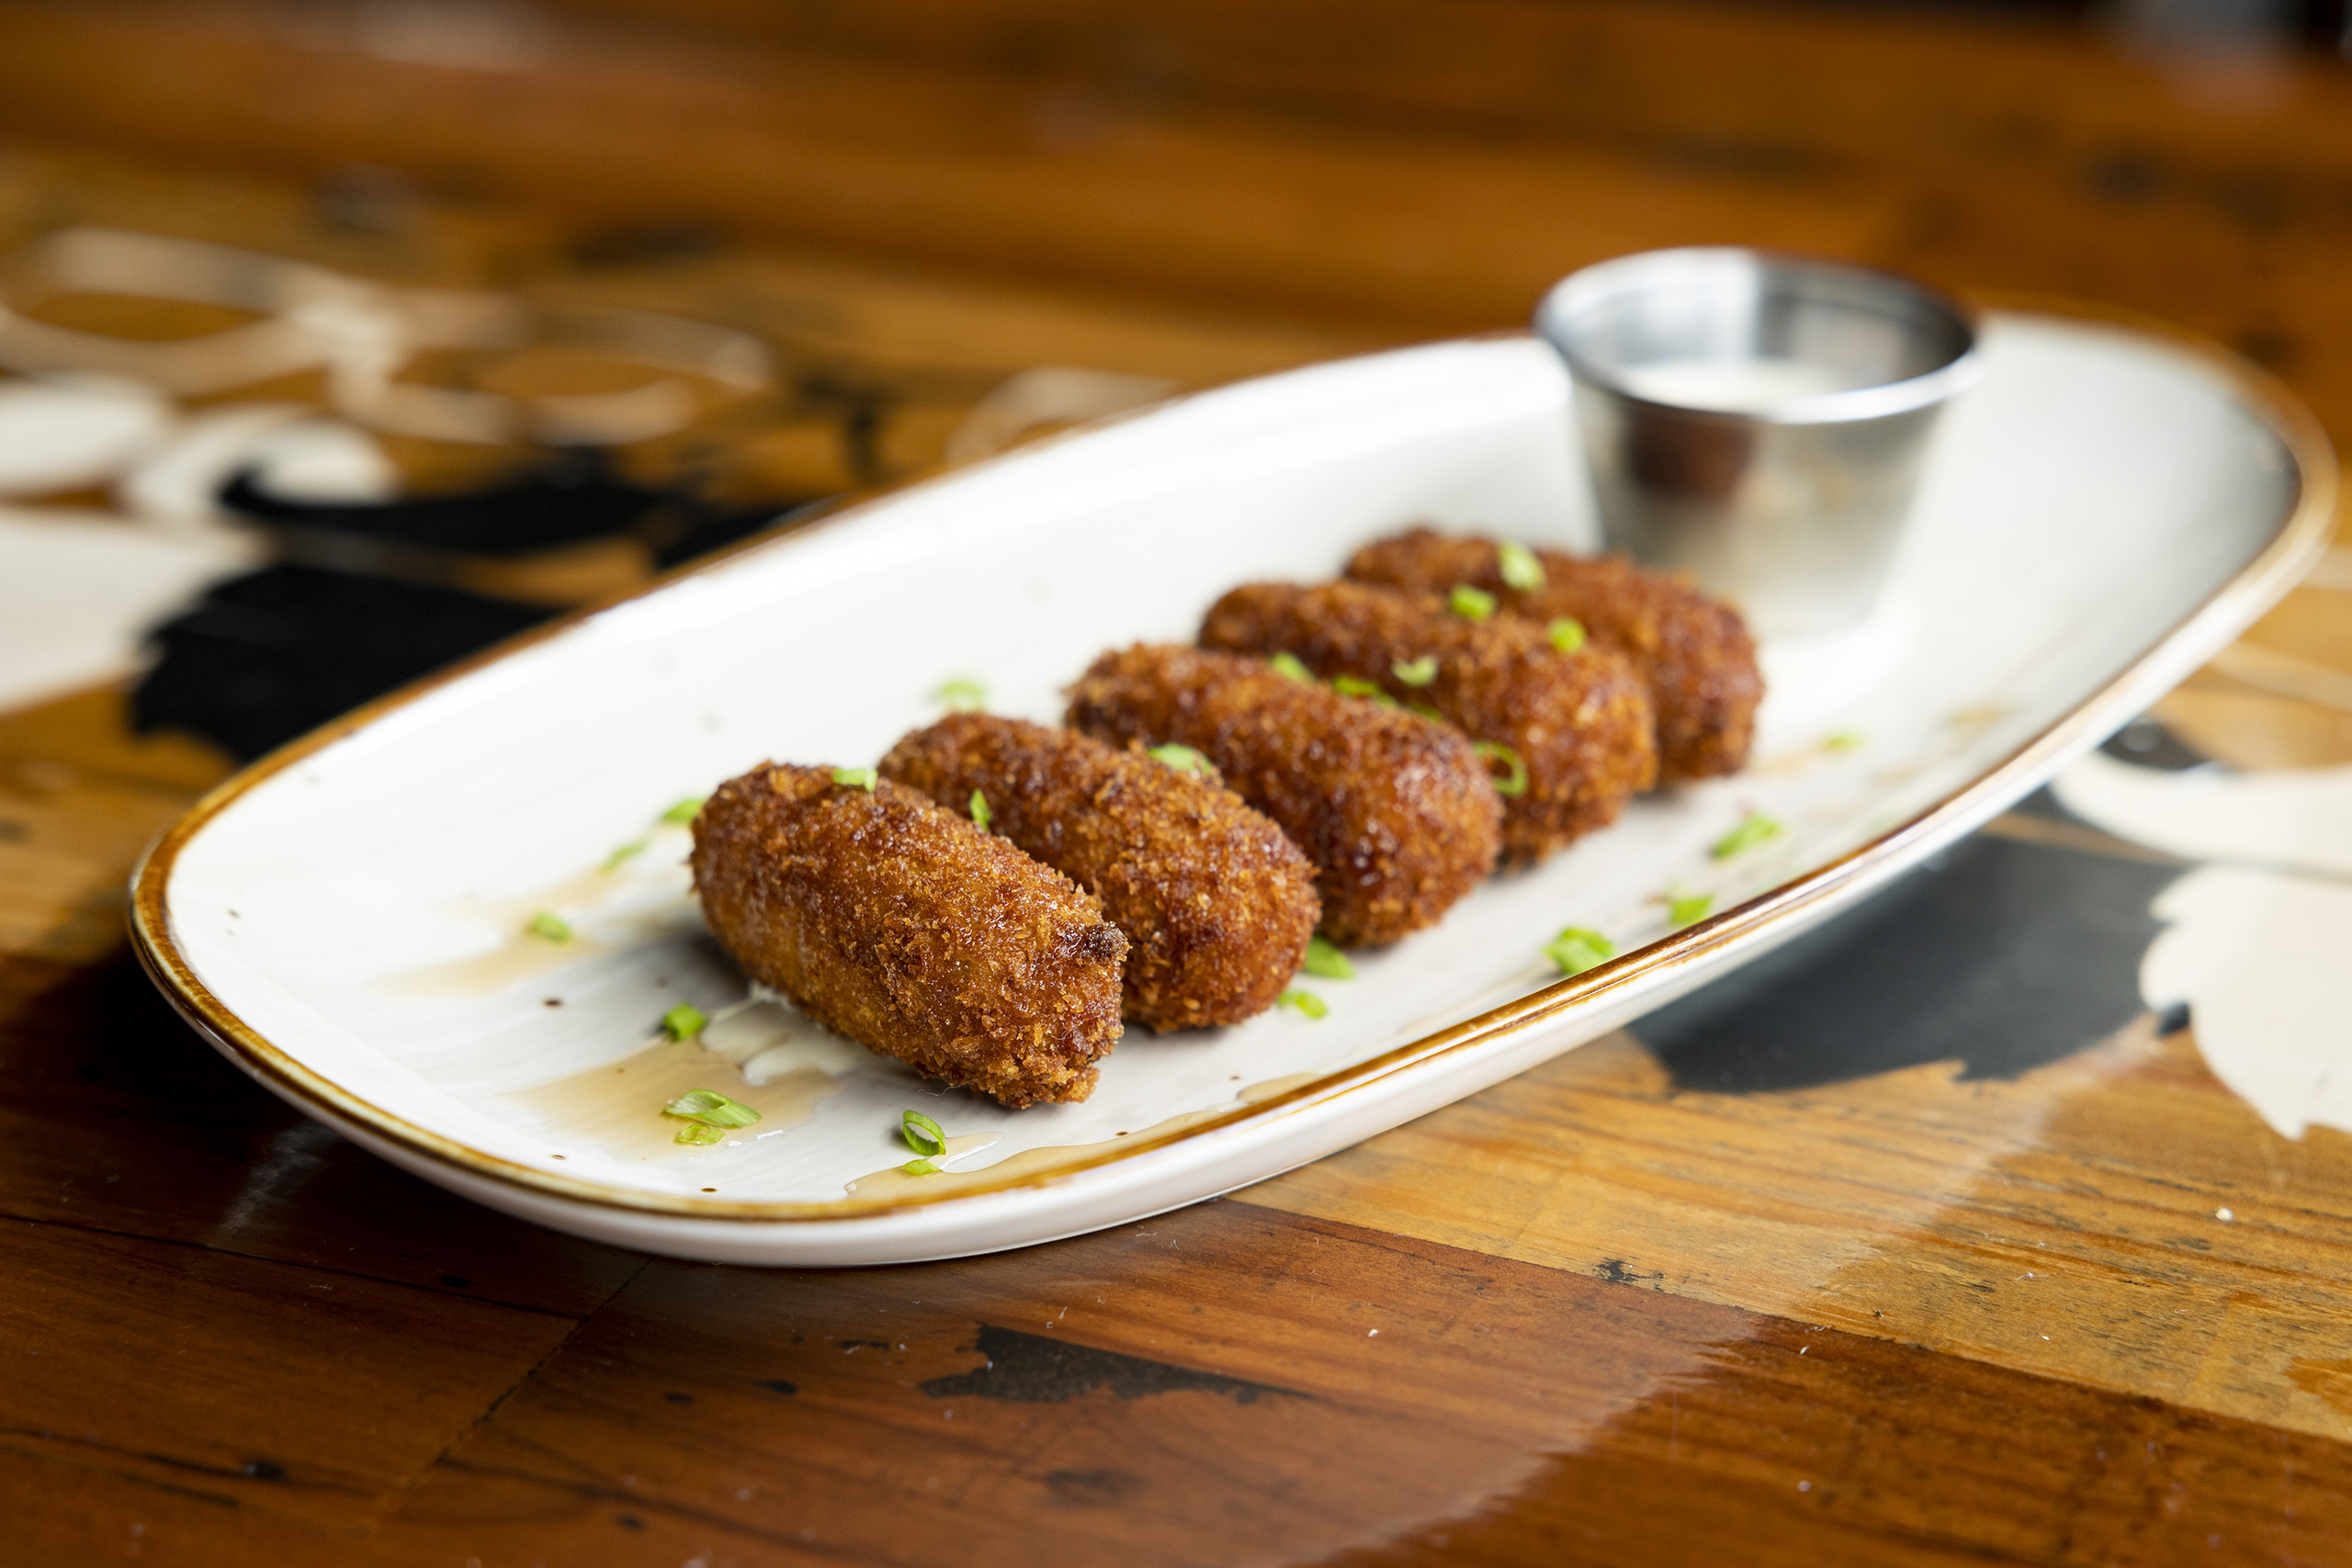 Bacon Croquettes from Crazy Uncle Mike's in Boca Raton, FL.